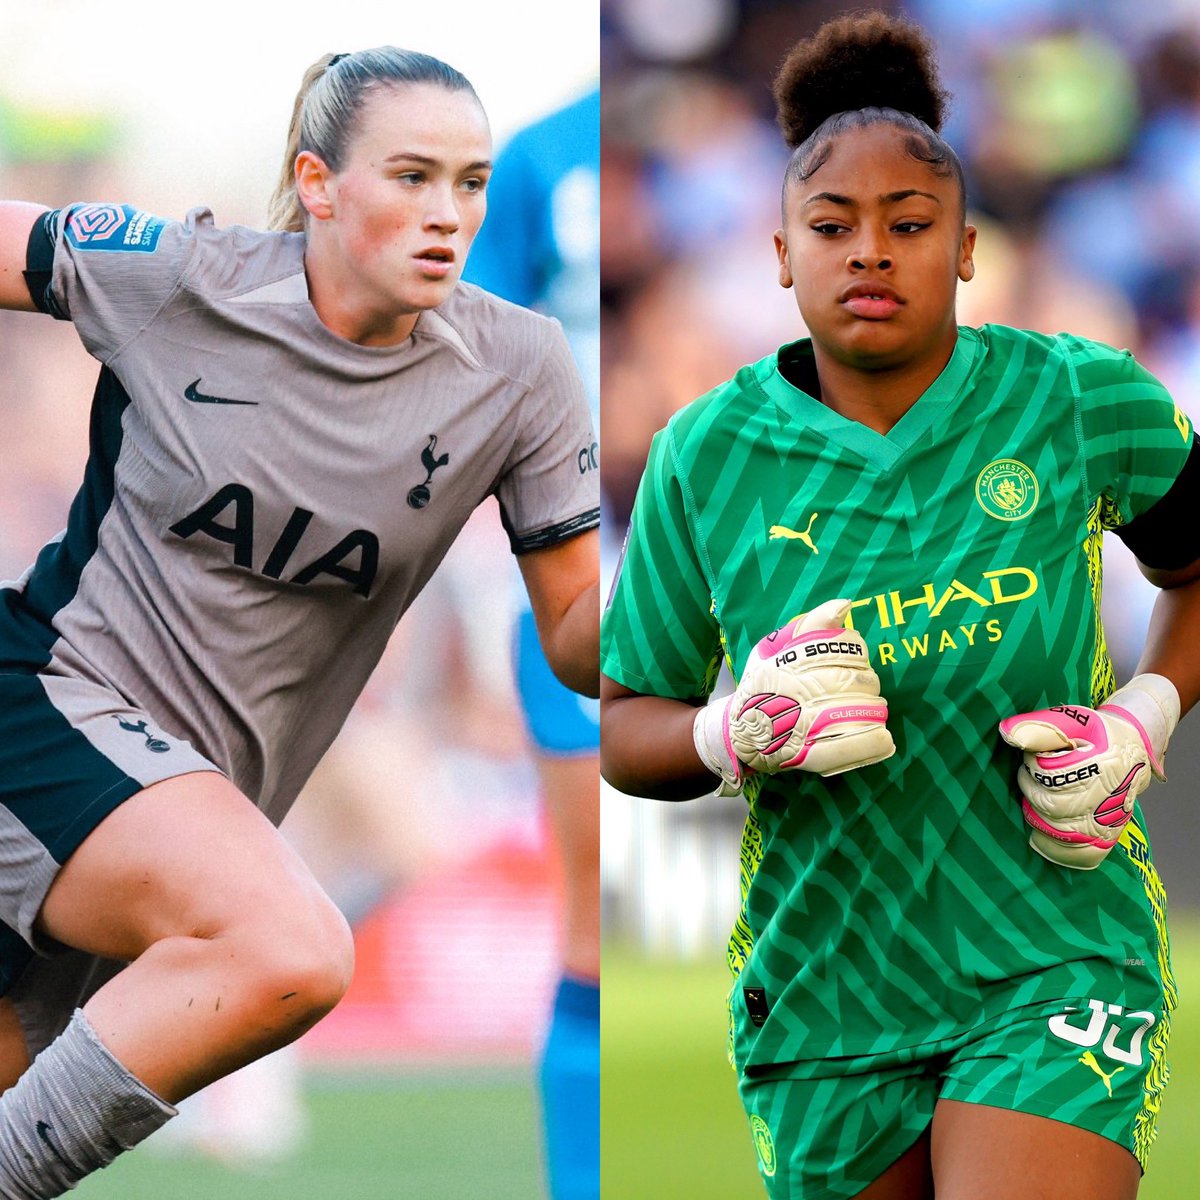 20-year-old Spurs midfielder Grace Clinton & 19-year-old Manchester City goalkeeper Khiara Keating receive their first England call-ups 💎🏴󠁧󠁢󠁥󠁮󠁧󠁿